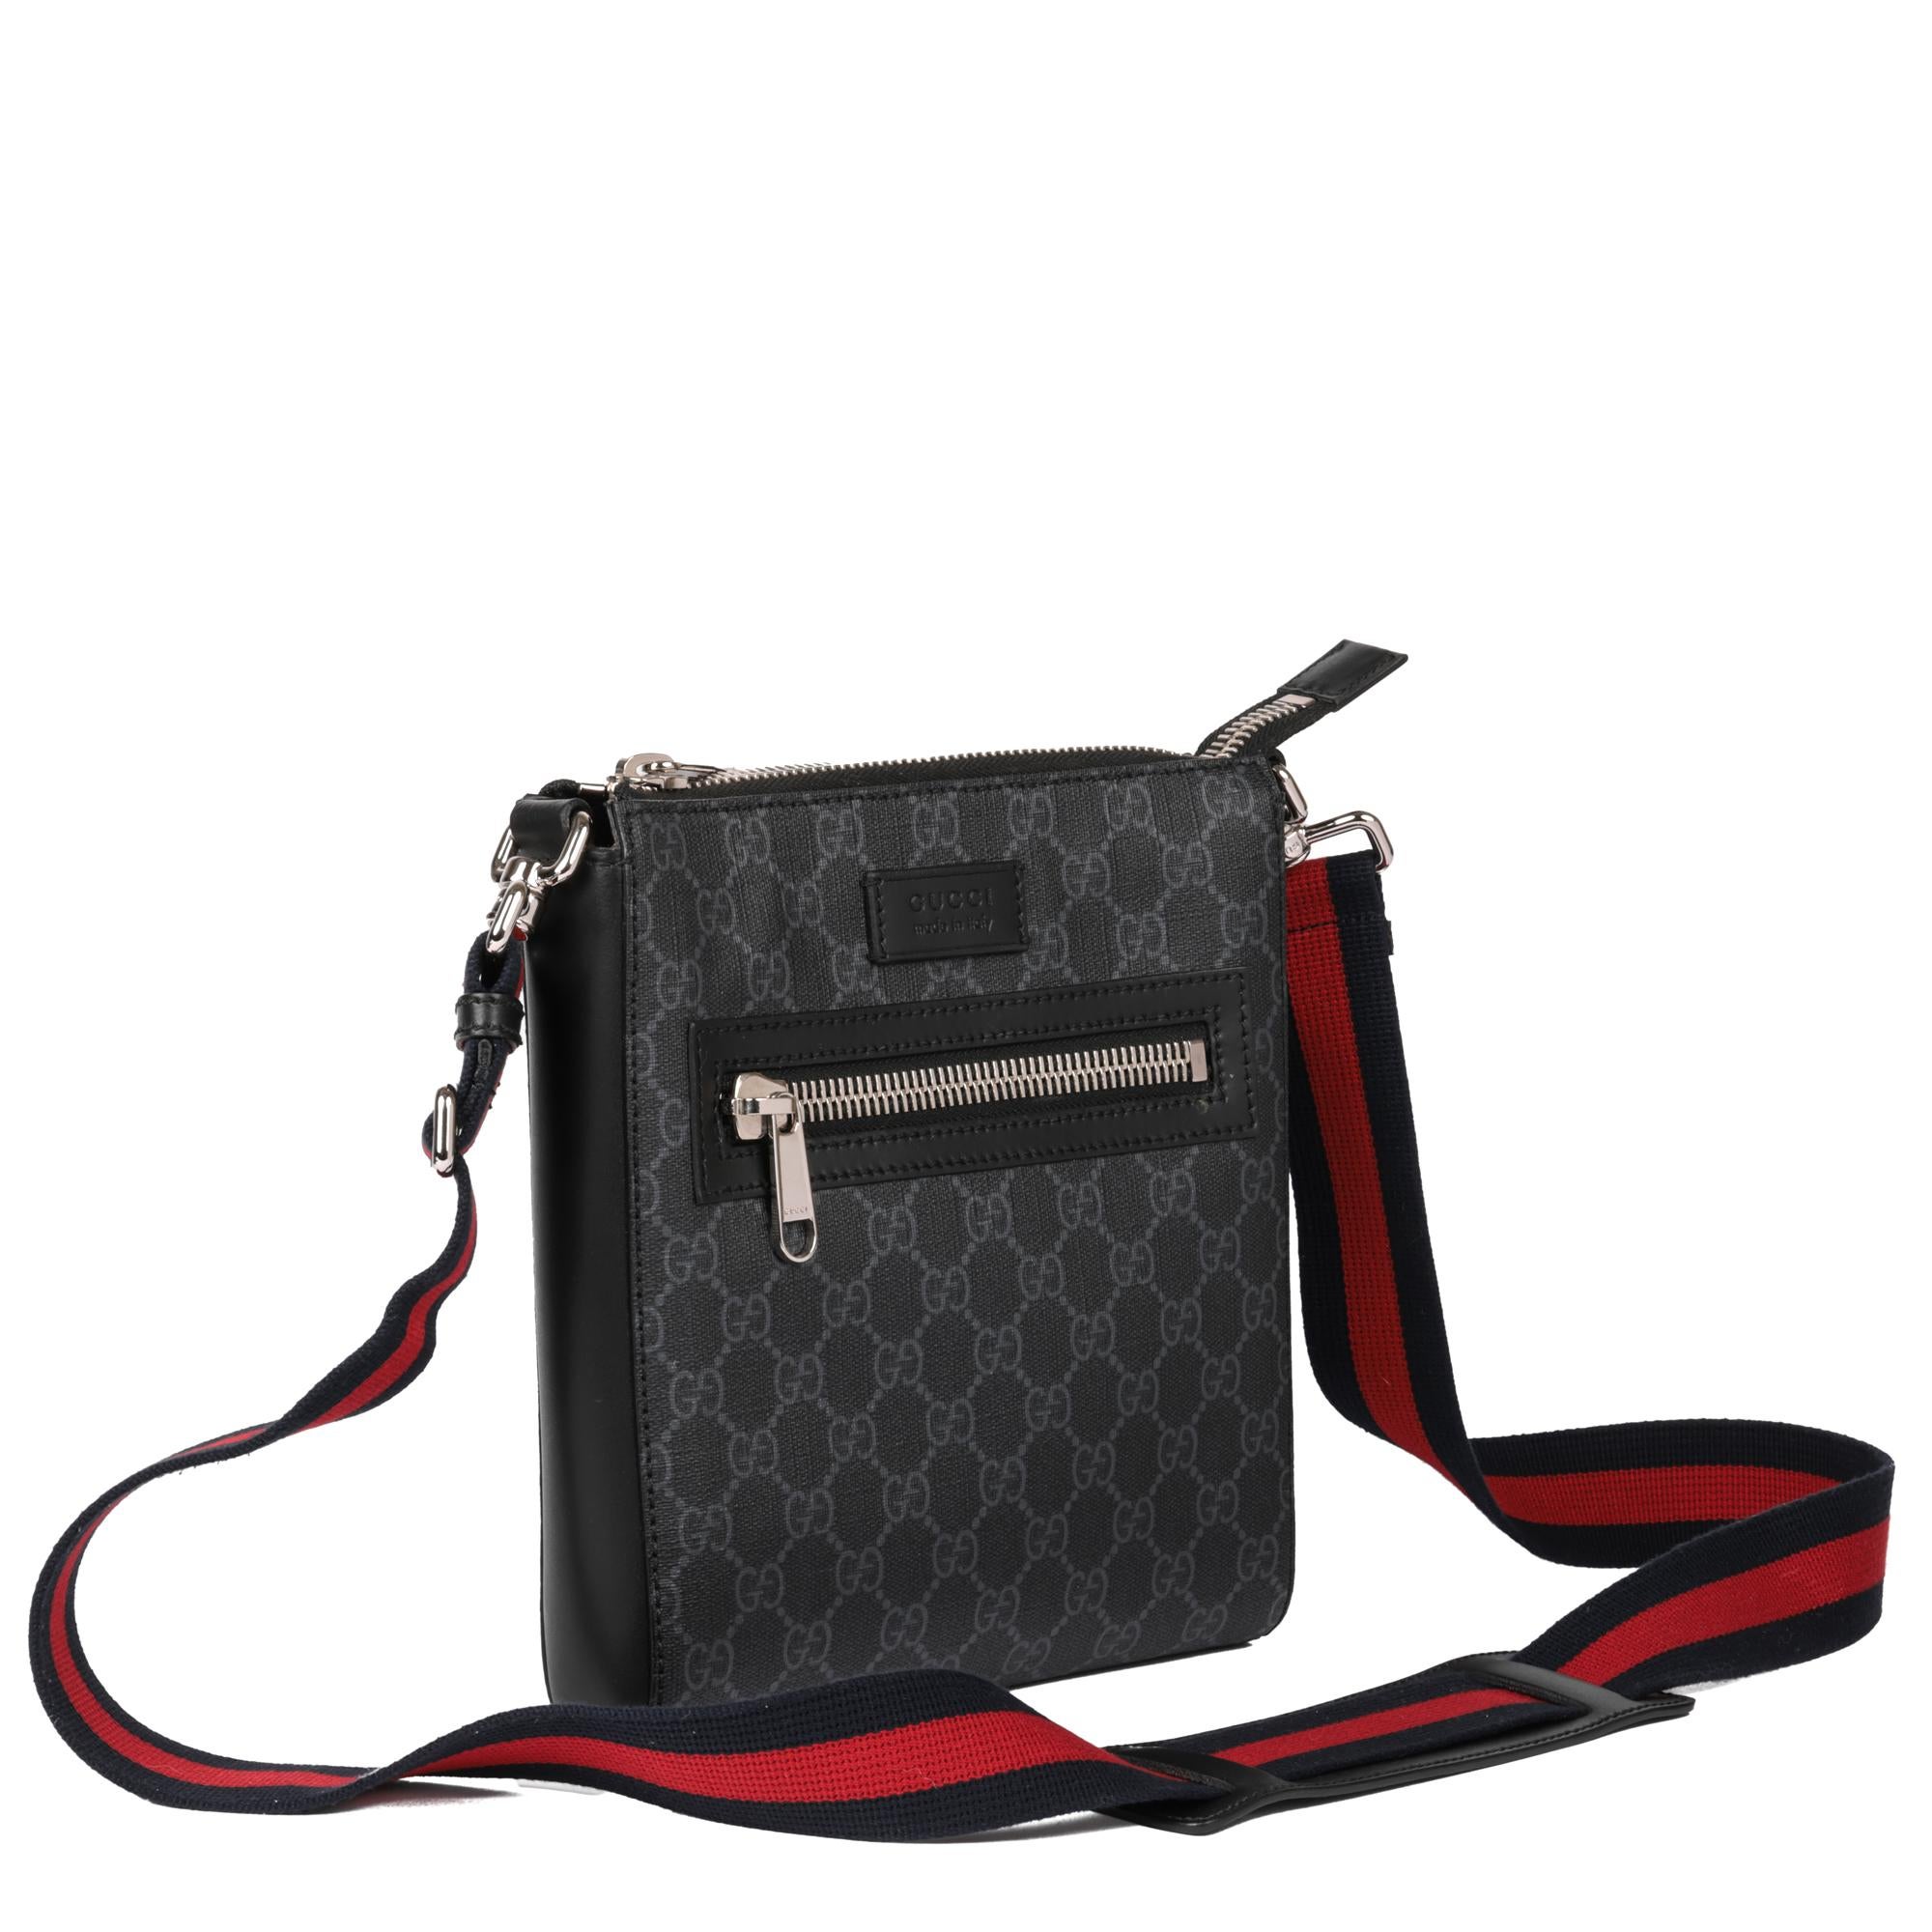 GUCCI
Grey GG Supreme Canvas & Black Calfskin Leather Small Messenger Bag 

Xupes Reference: HB5155
Serial Number: 523599 001998
Age (Circa): 2019
Accompanied By: Gucci Dust Bag, Care Booklet, Gucci Receipt
Authenticity Details: Date Stamp (Made in